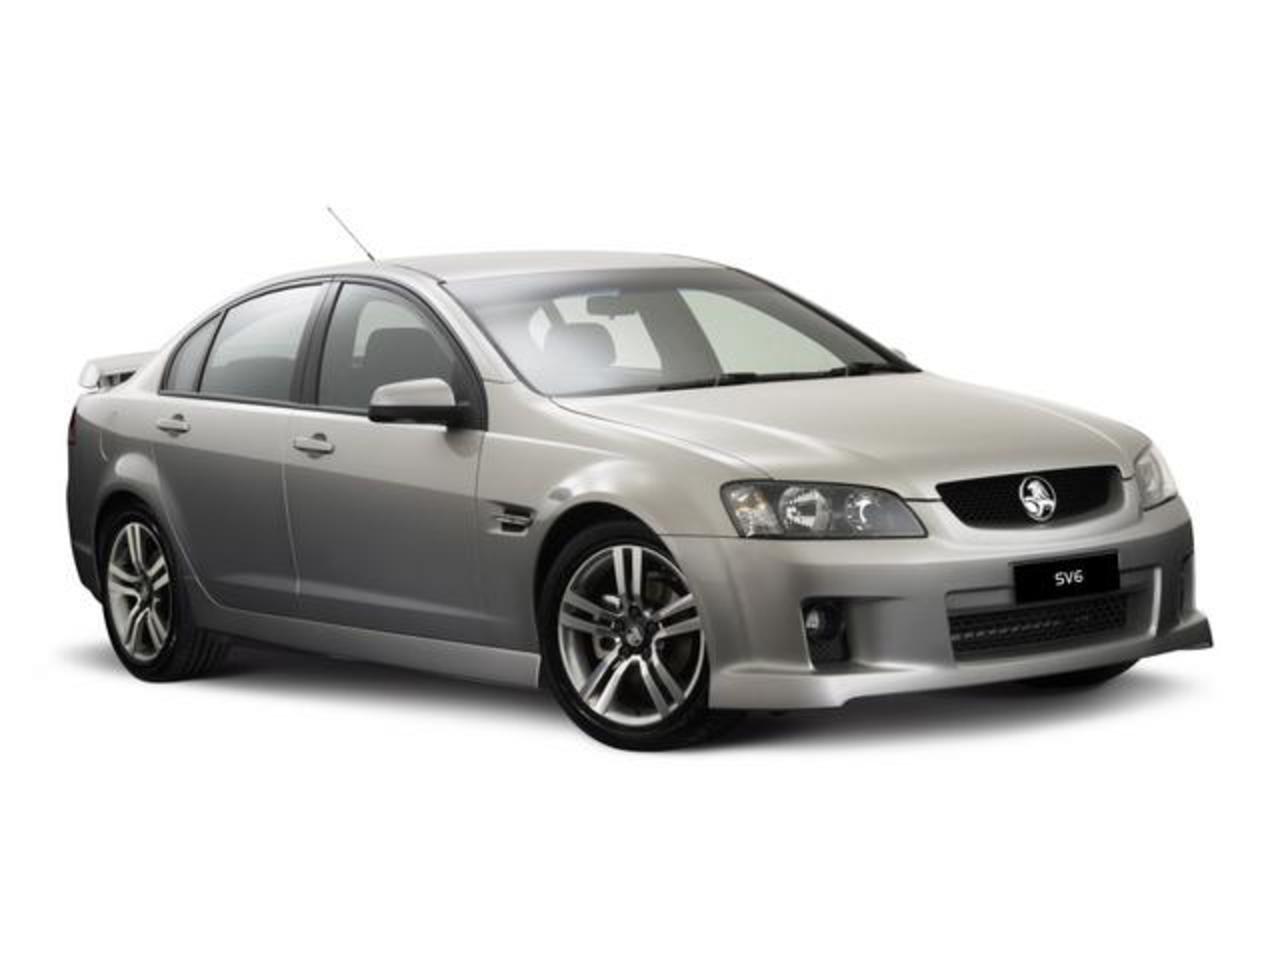 Holden Commodore SV6. View Download Wallpaper. 640x480. Comments